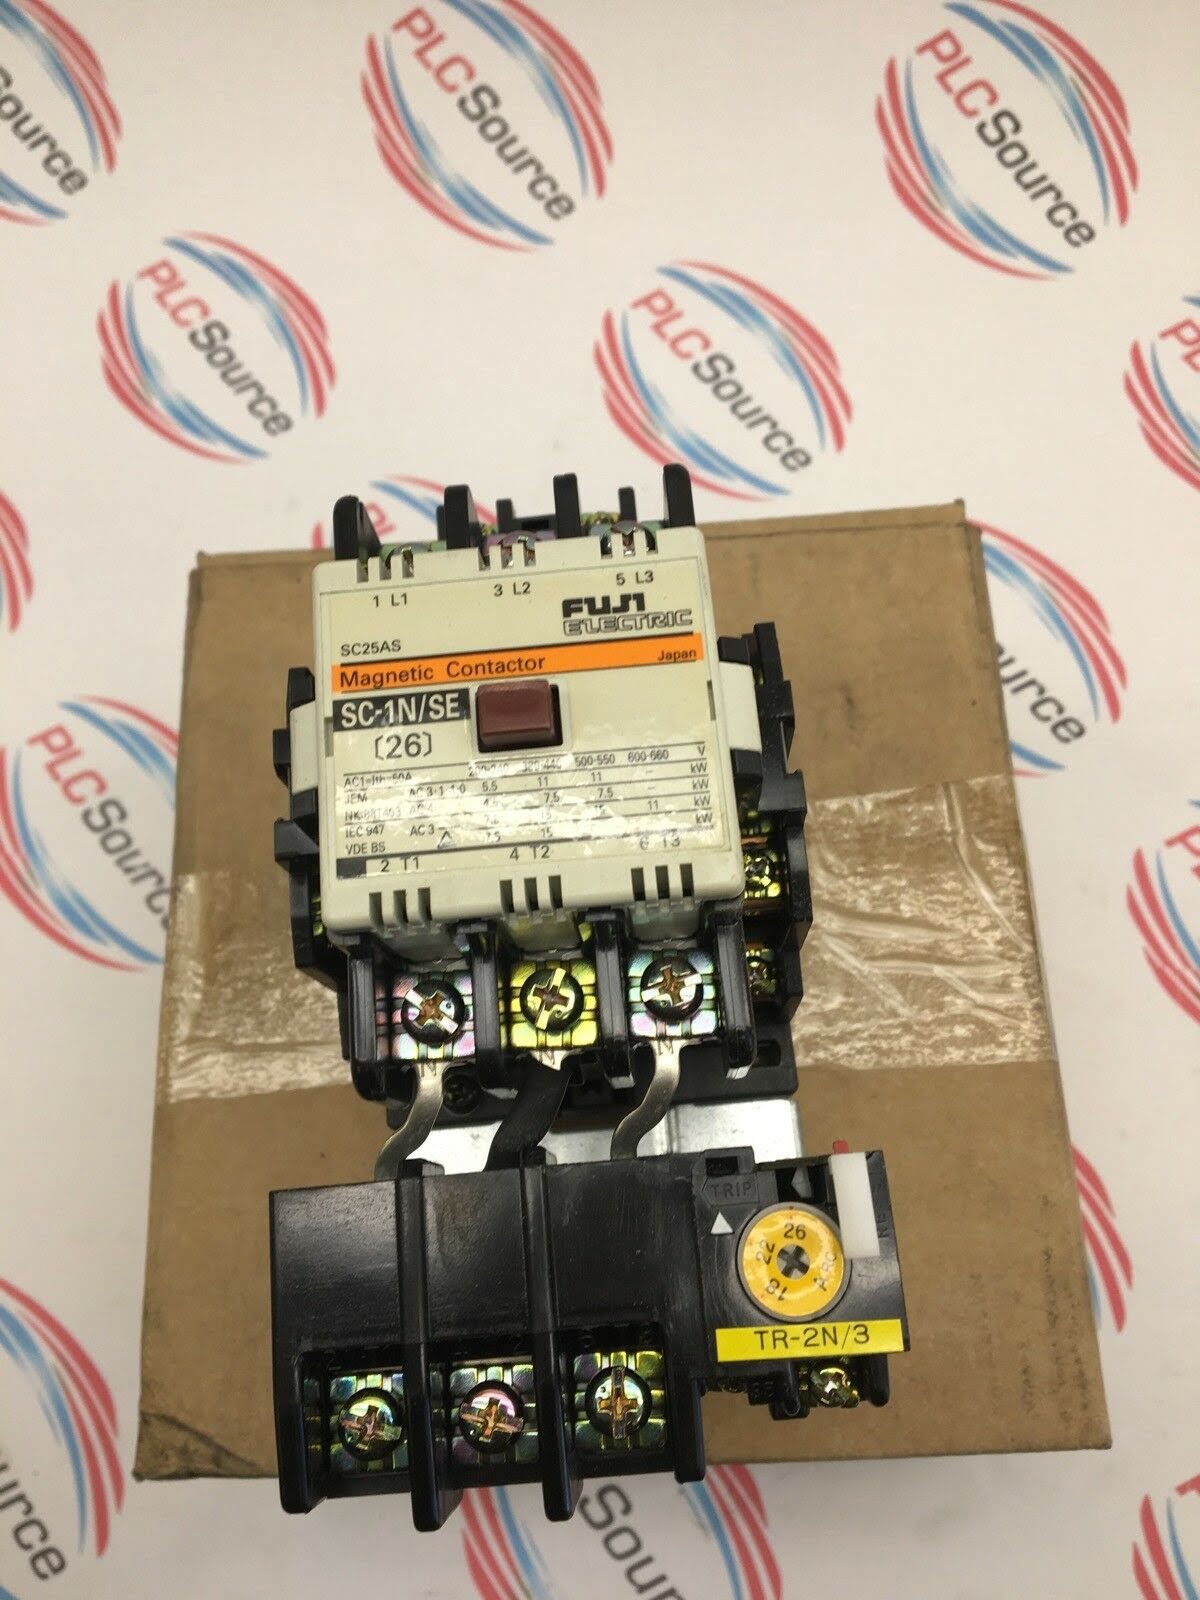 Fuji Electric Sc-1n SC1N Magnetic Contactor 26a for sale online 